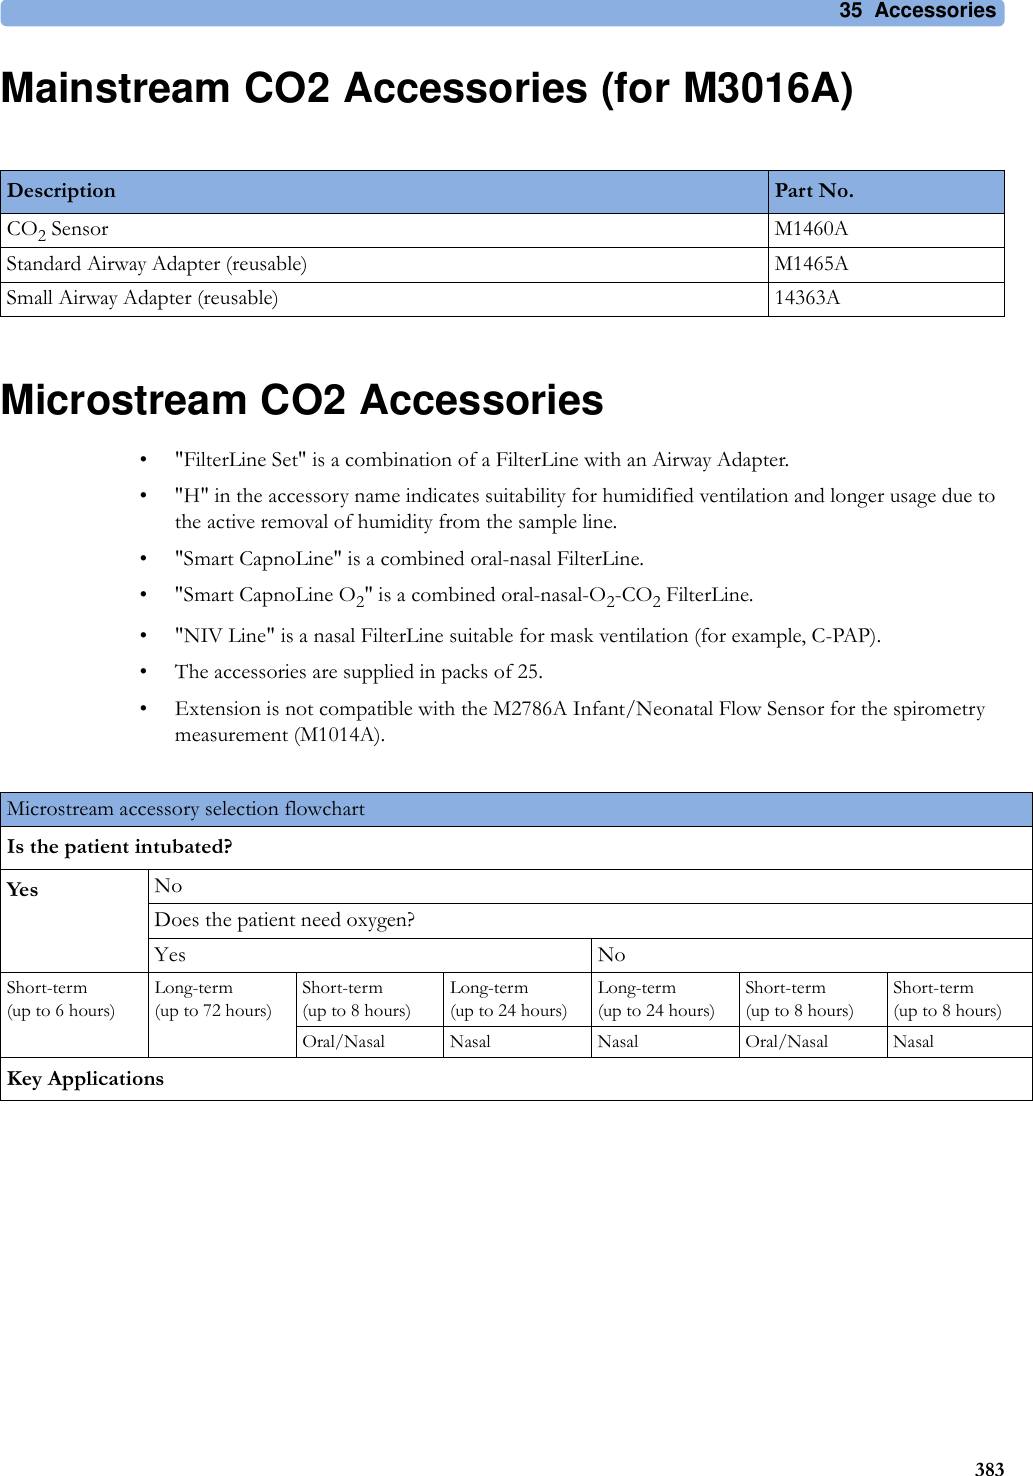 35 Accessories383Mainstream CO2 Accessories (for M3016A)Microstream CO2 Accessories• &quot;FilterLine Set&quot; is a combination of a FilterLine with an Airway Adapter.• &quot;H&quot; in the accessory name indicates suitability for humidified ventilation and longer usage due to the active removal of humidity from the sample line.• &quot;Smart CapnoLine&quot; is a combined oral-nasal FilterLine.• &quot;Smart CapnoLine O2&quot; is a combined oral-nasal-O2-CO2 FilterLine.• &quot;NIV Line&quot; is a nasal FilterLine suitable for mask ventilation (for example, C-PAP).• The accessories are supplied in packs of 25.• Extension is not compatible with the M2786A Infant/Neonatal Flow Sensor for the spirometry measurement (M1014A).Description Part No.CO2 Sensor M1460AStandard Airway Adapter (reusable) M1465ASmall Airway Adapter (reusable) 14363AMicrostream accessory selection flowchartIs the patient intubated?Yes NoDoes the patient need oxygen?Yes NoShort-term(up to 6 hours)Long-term(up to 72 hours)Short-term(up to 8 hours)Long-term(up to 24 hours)Long-term(up to 24 hours)Short-term(up to 8 hours)Short-term(up to 8 hours)Oral/Nasal Nasal Nasal Oral/Nasal NasalKey Applications